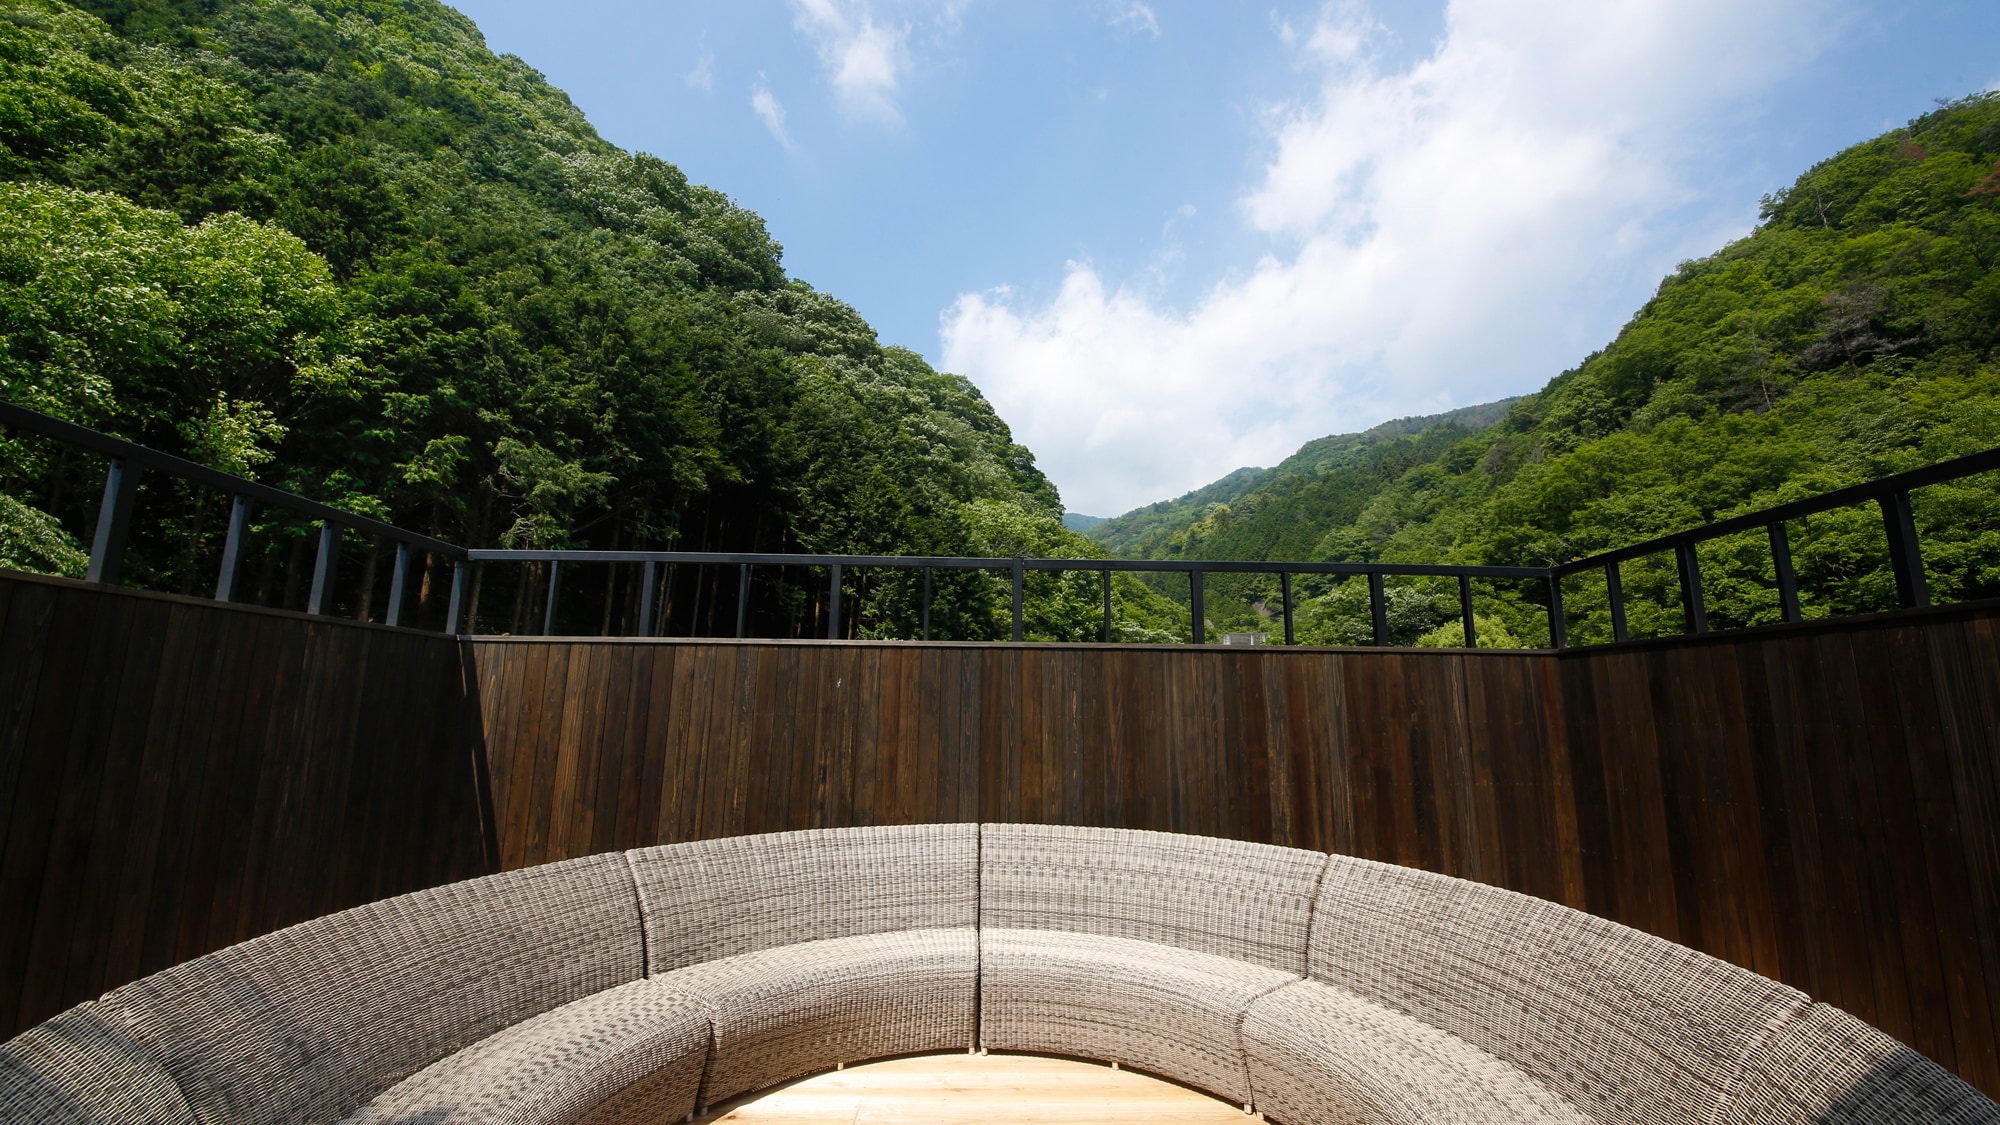 [Hoshimi Terrace] Surrounded by walls on all sides, it is a place just for looking up at the sky. Watch the starry sky on a sunny day.